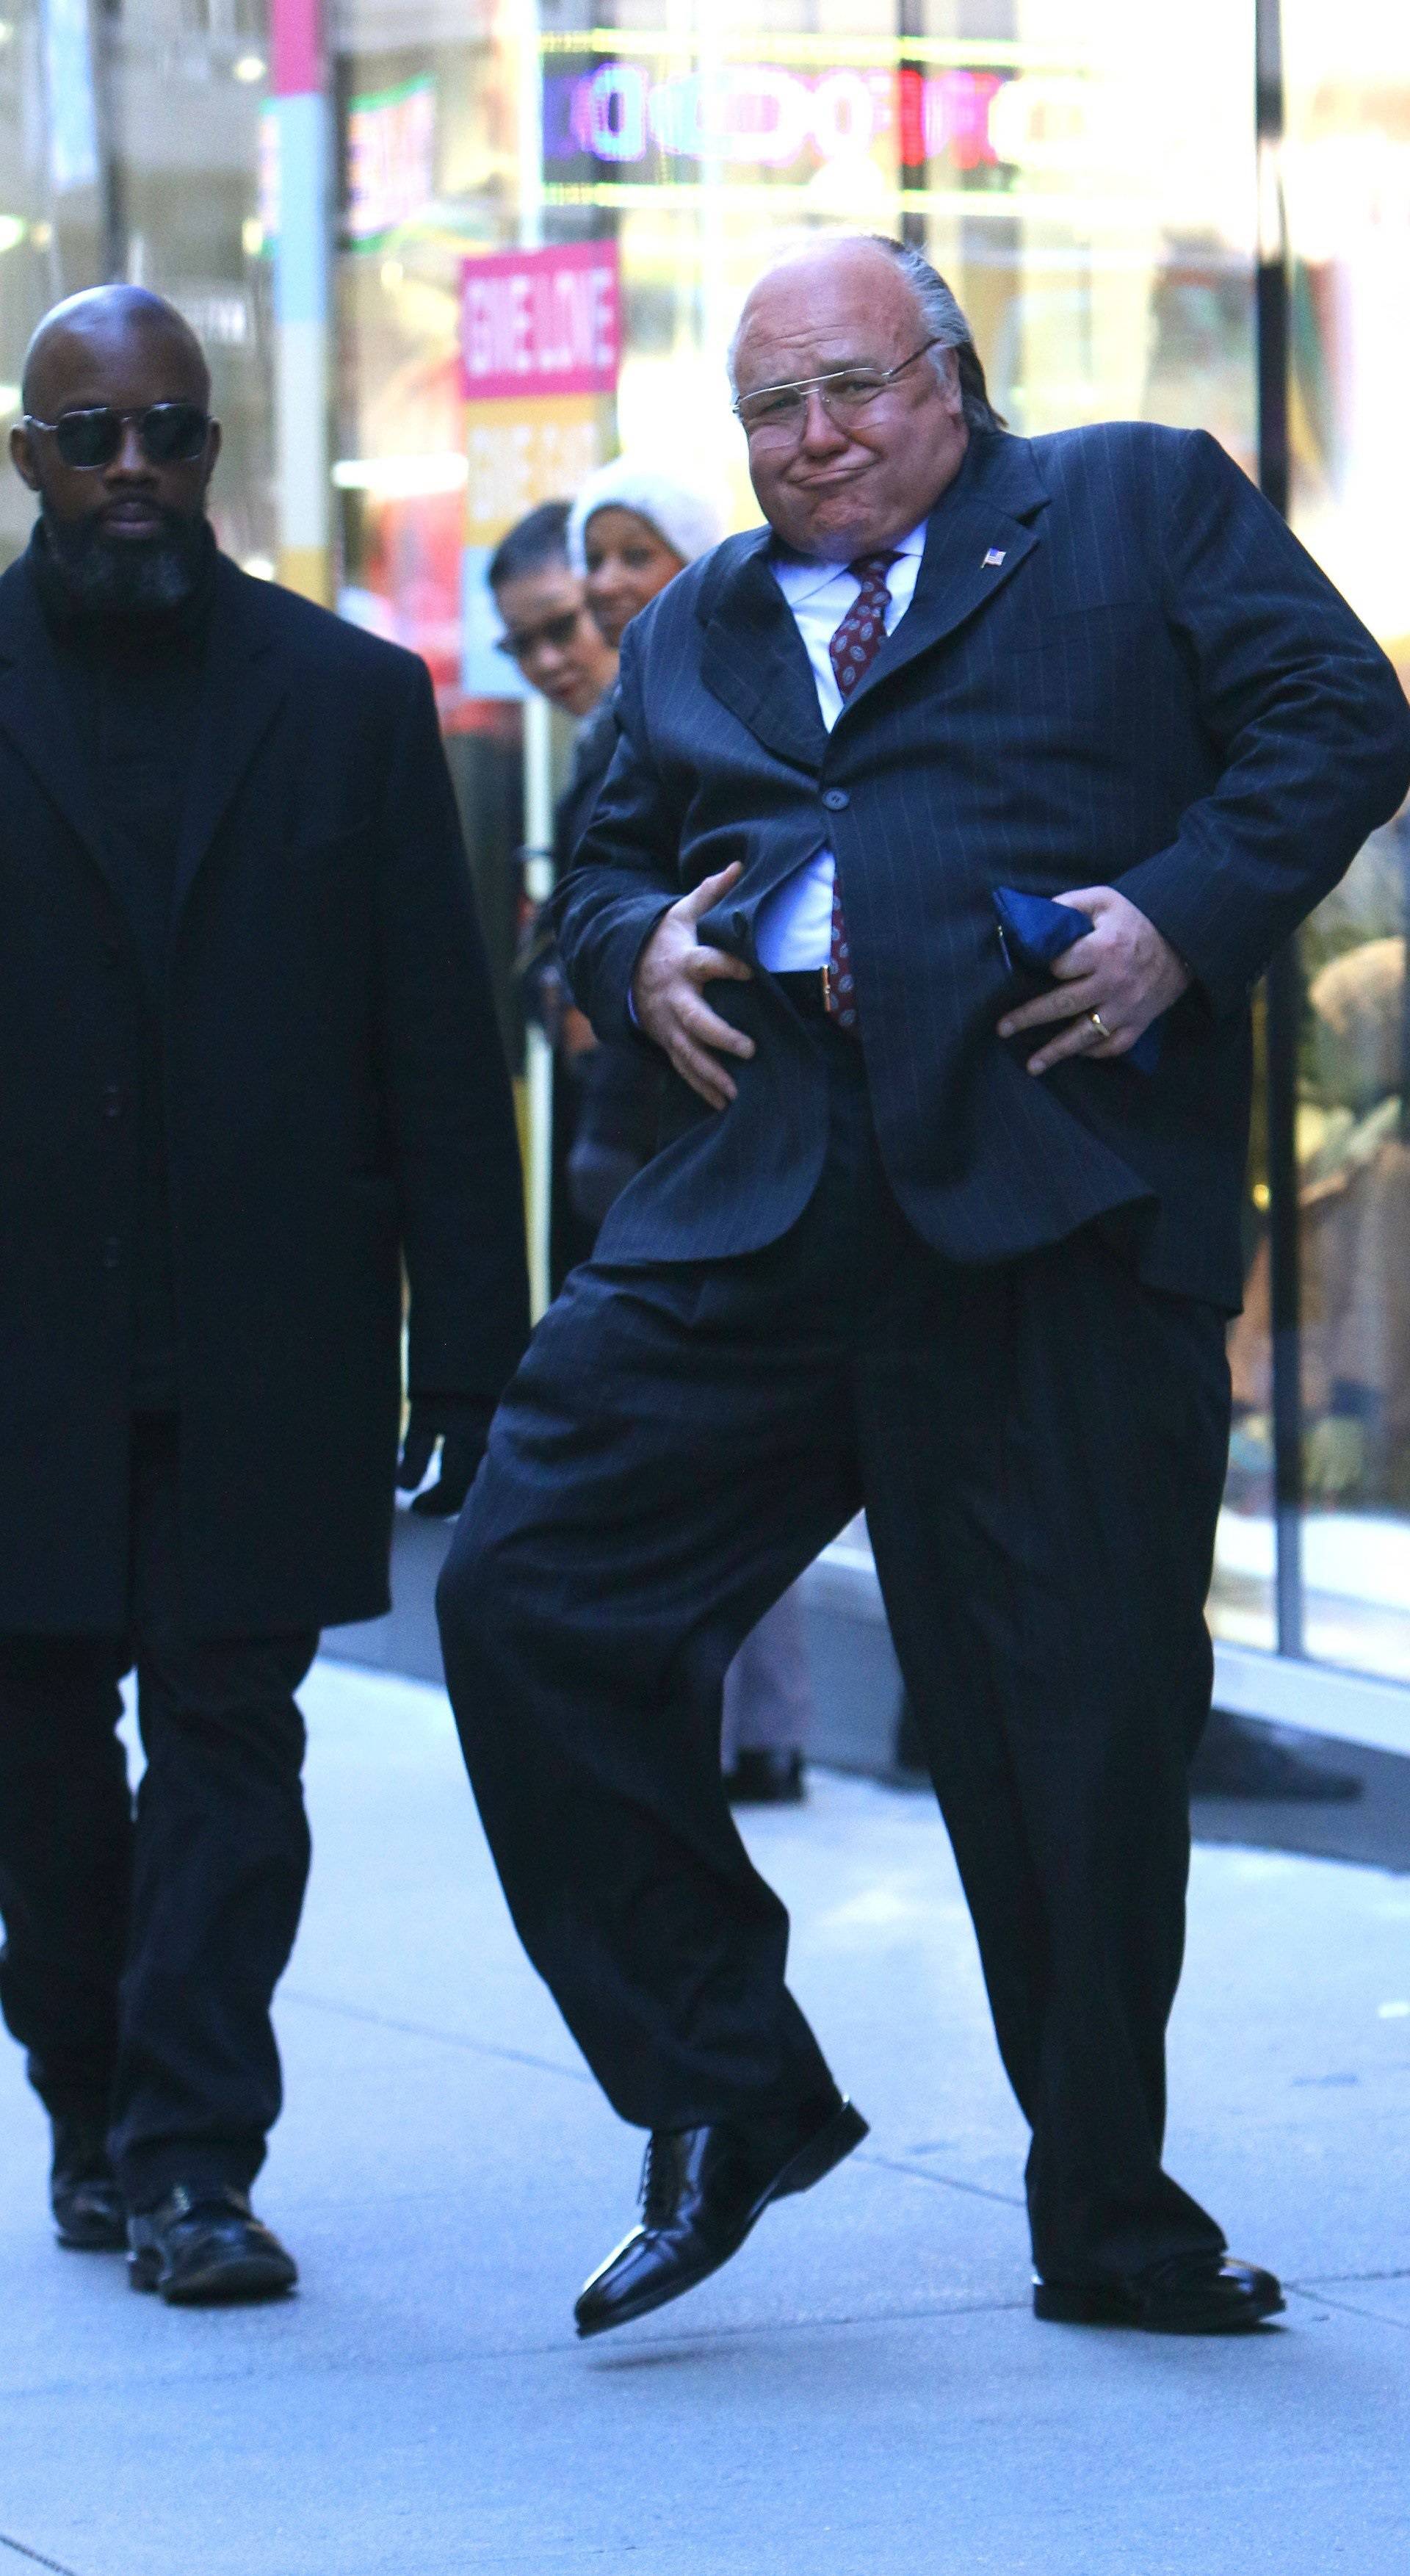 Russell Crowe gets playful with his prosthetic belly while filming "The Loudest Voice" in NYC